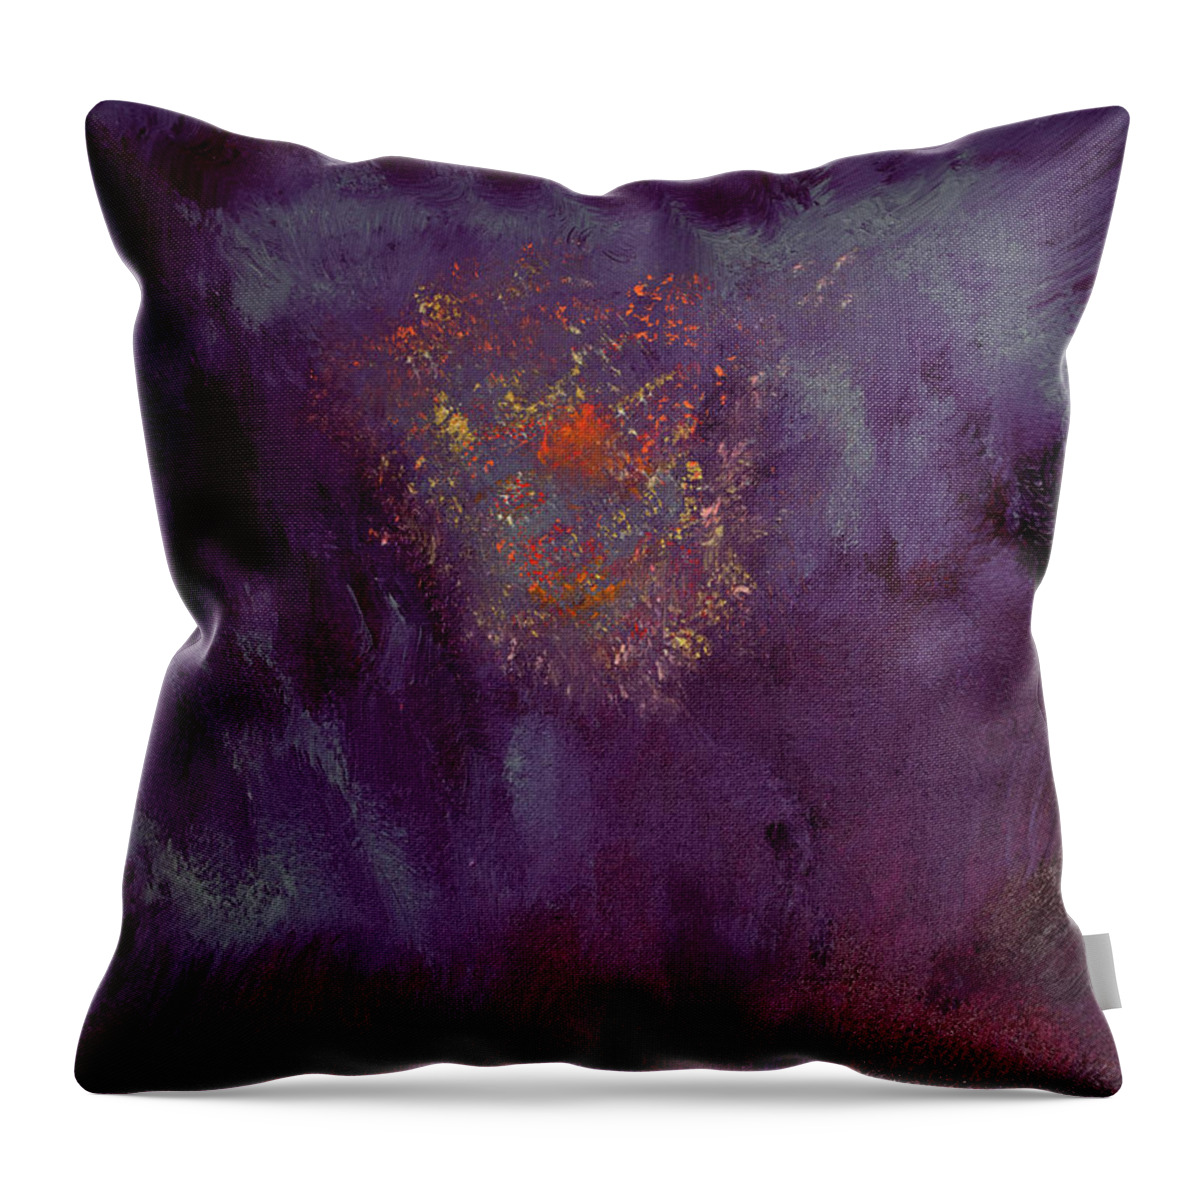 Lilac Throw Pillow featuring the painting Lilac In Bloom by Joe Loffredo